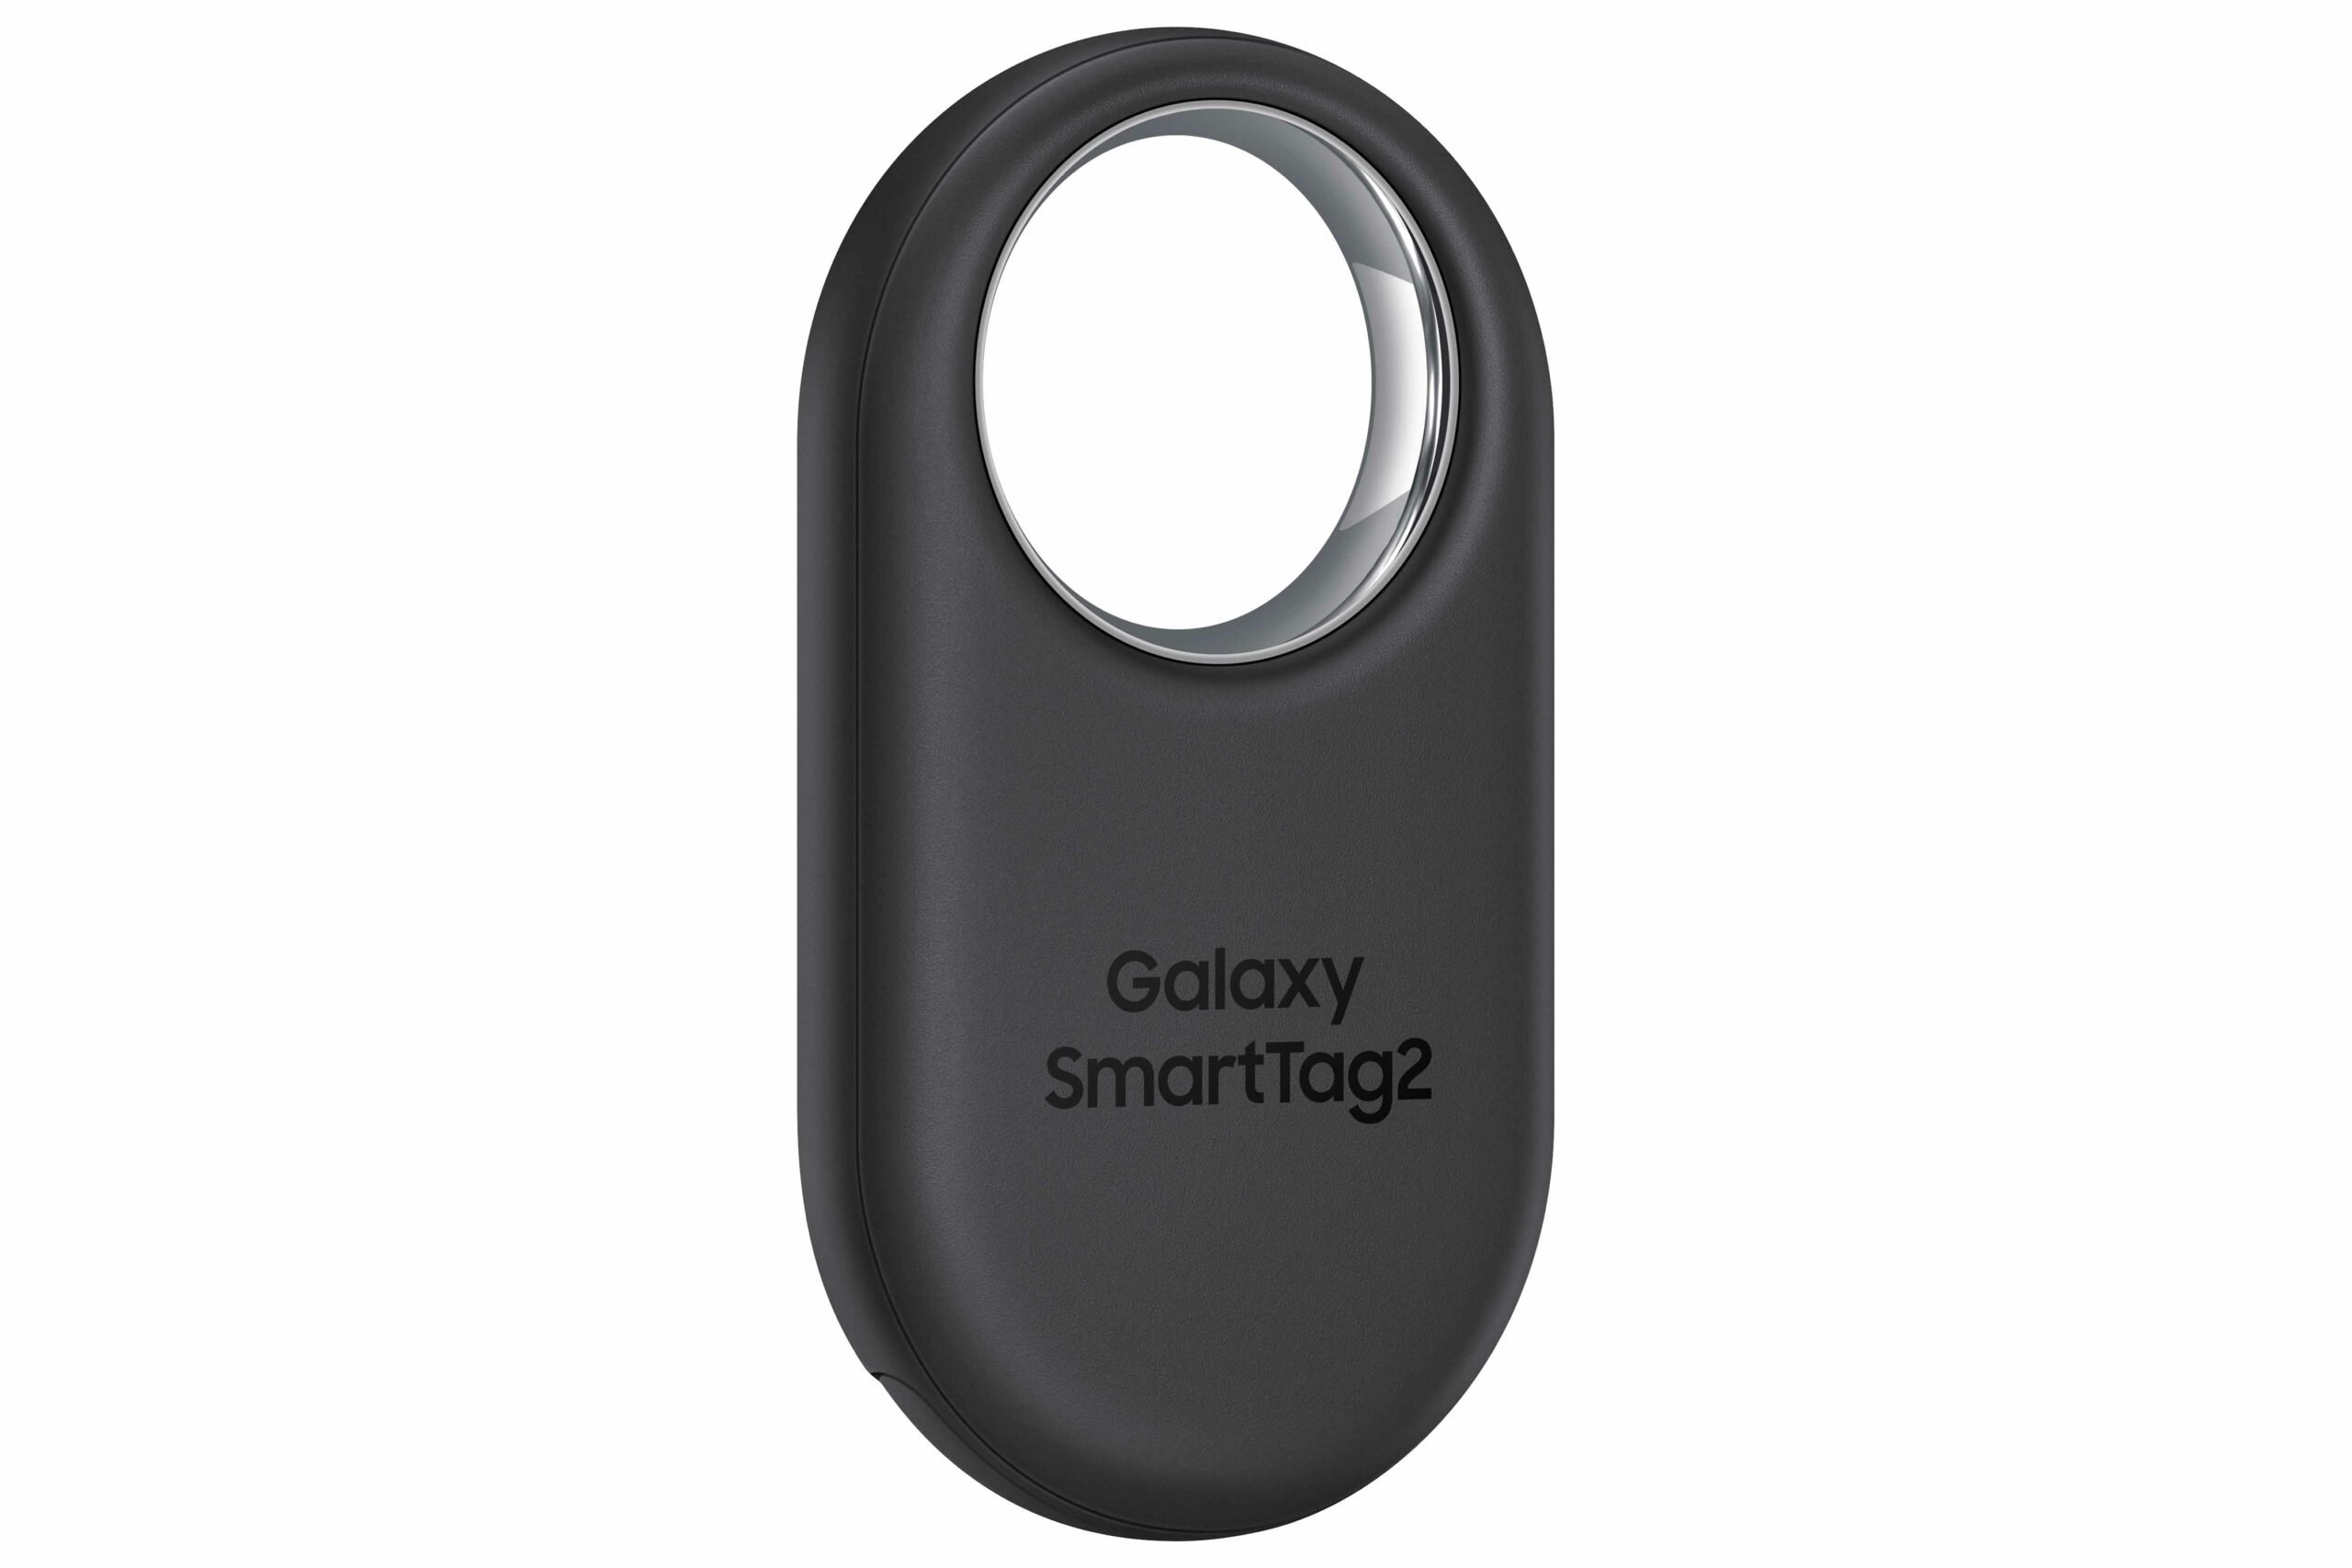 Galaxy SmartTag 2 is official with new features and major redesign -  SamMobile